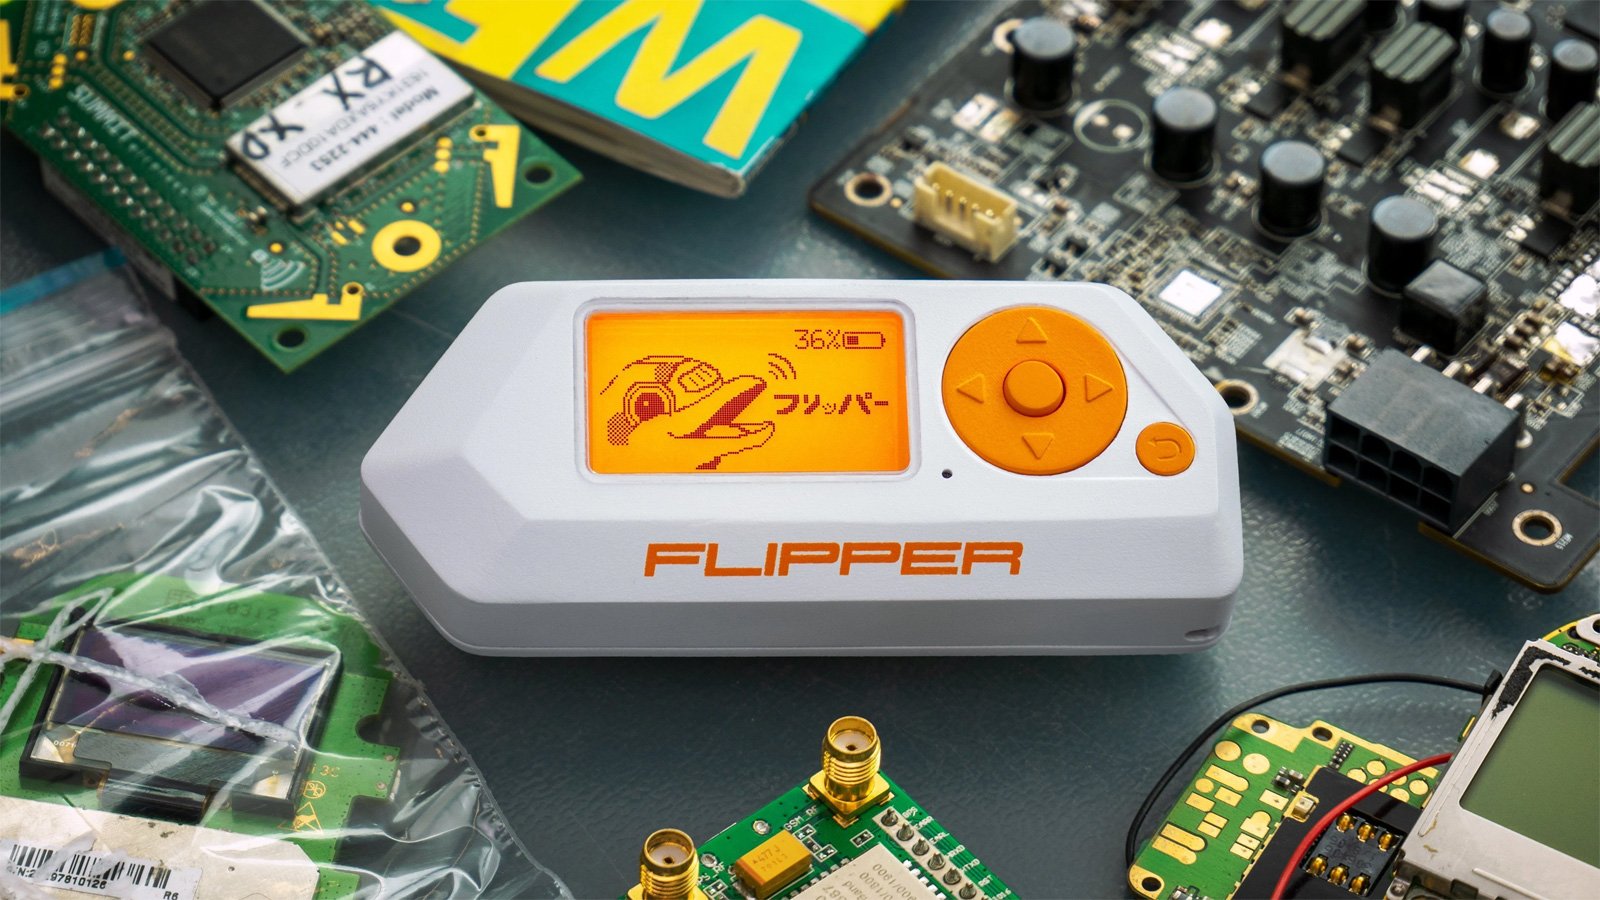 Flipper Zero can be used to launch iOS Bluetooth spam attacks – Source: www.bleepingcomputer.com